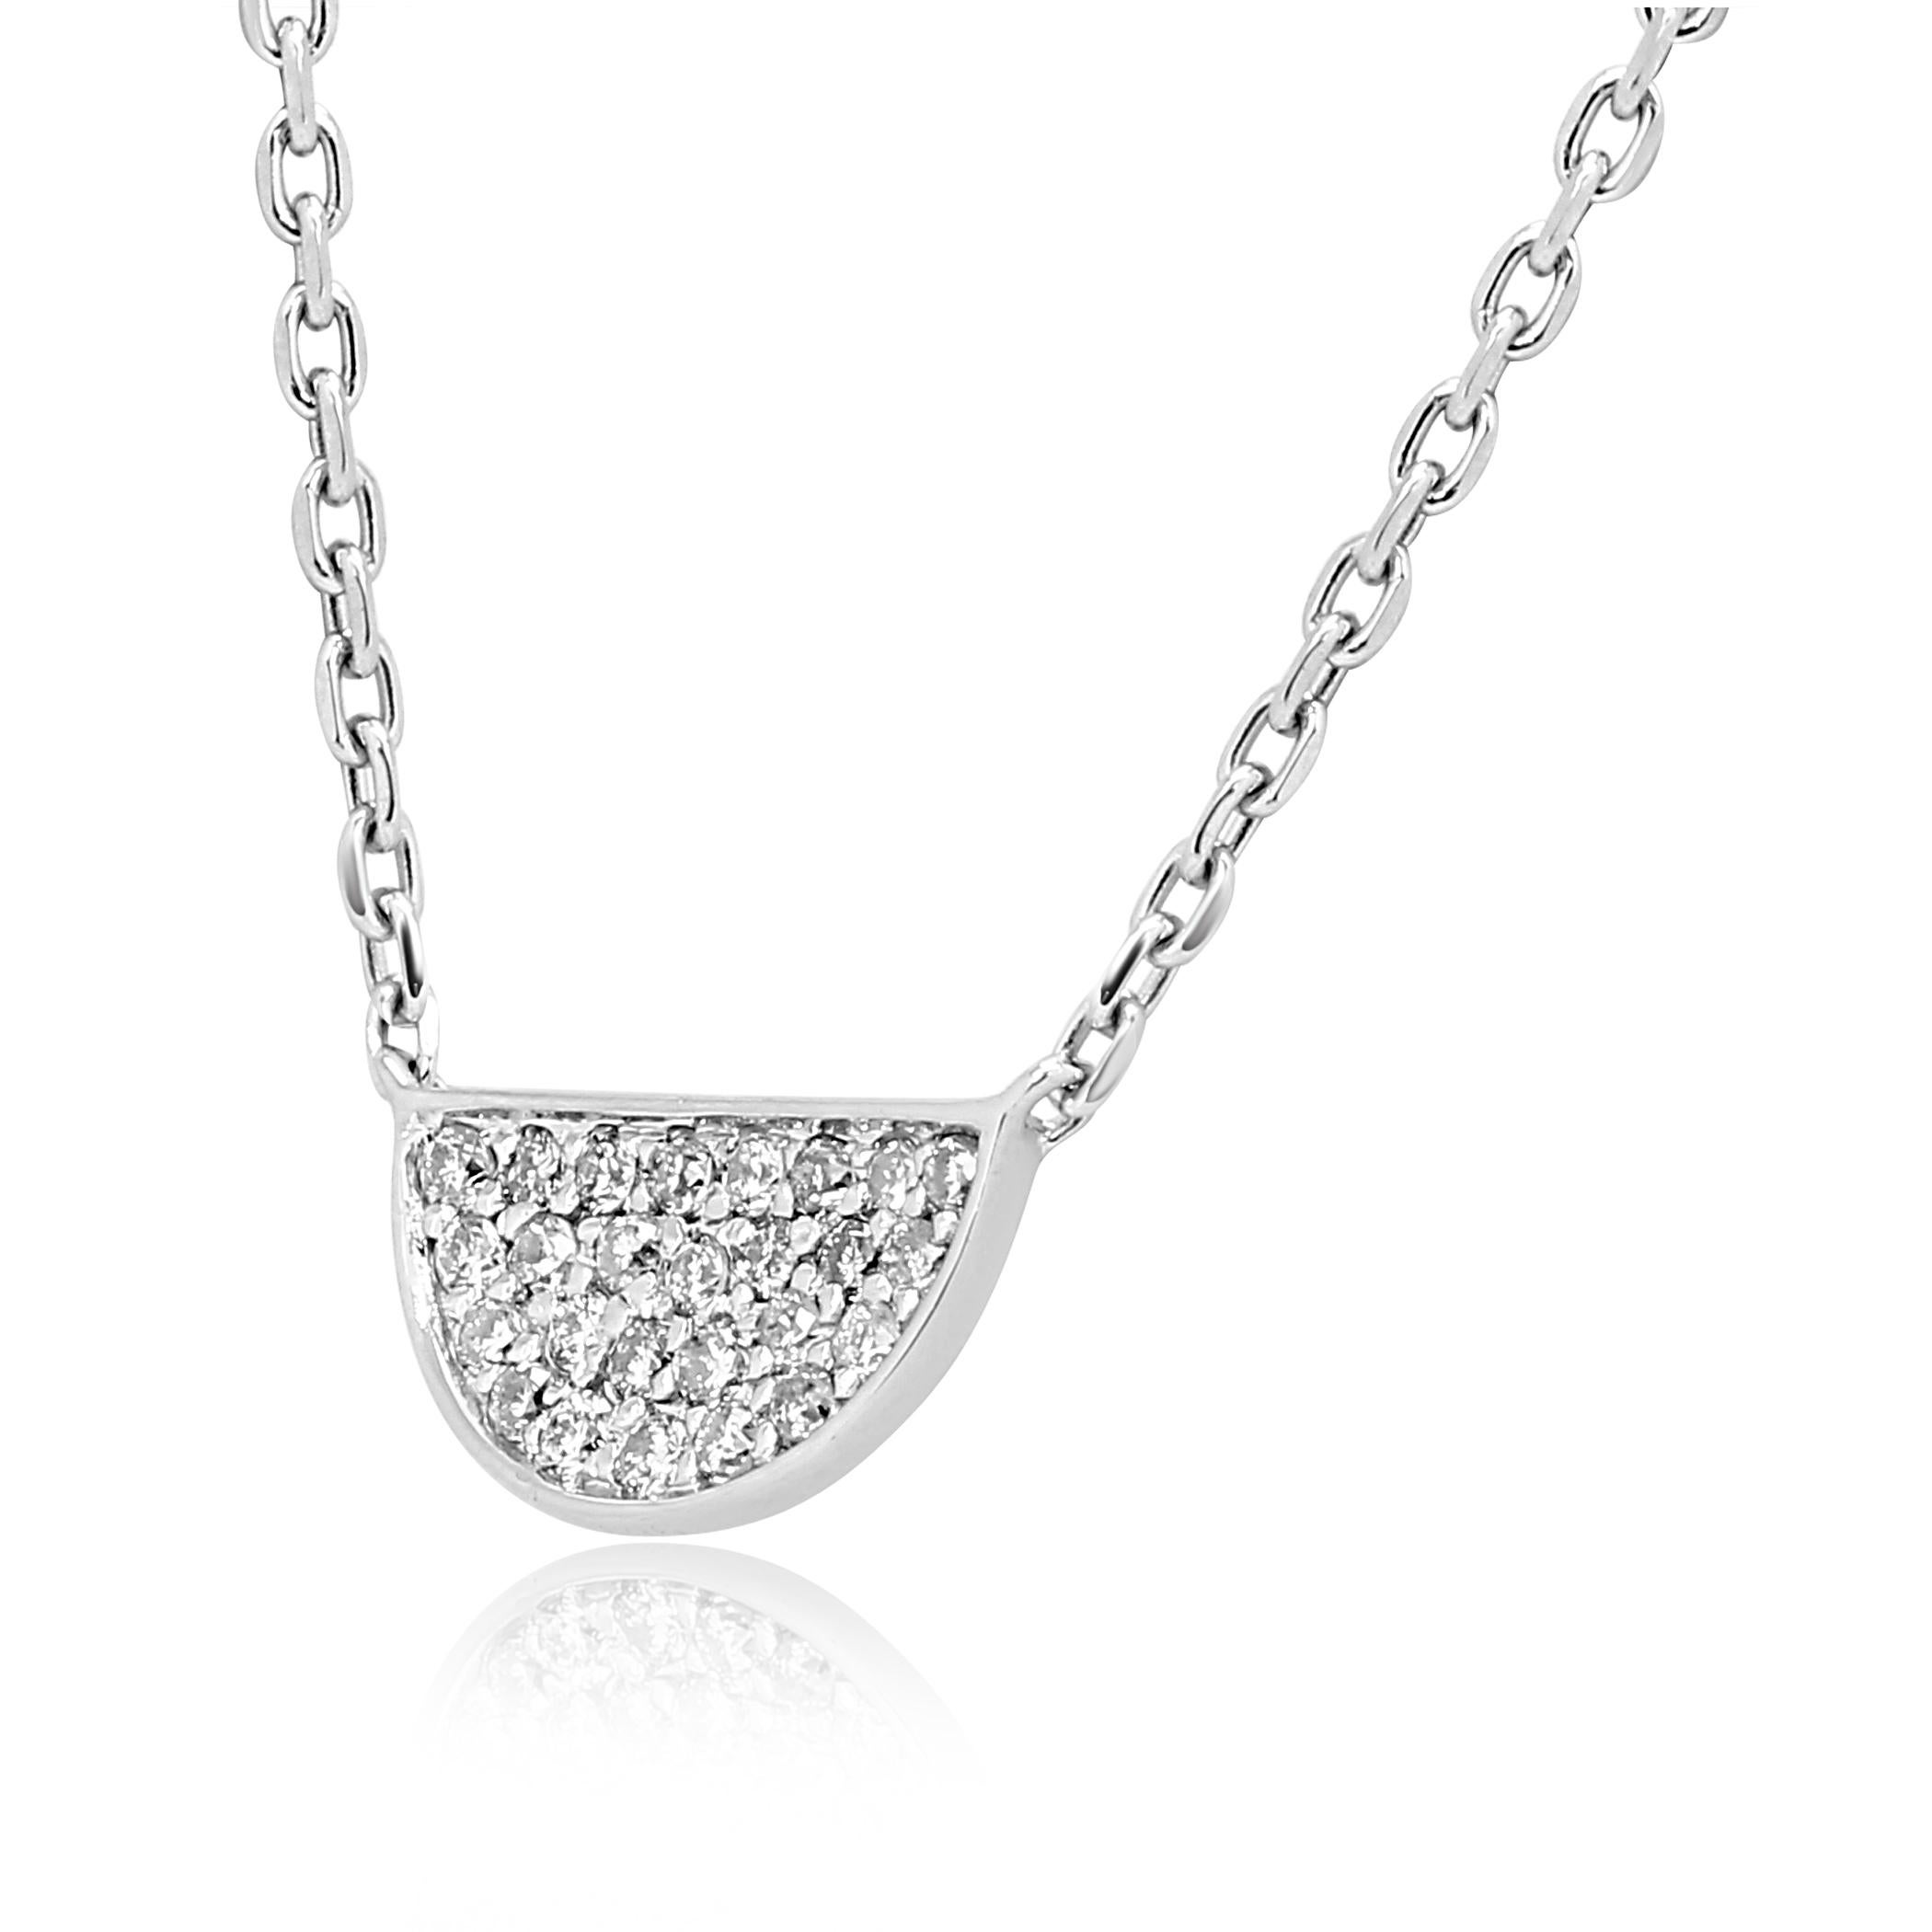 White Diamond Round G-H Color SI Clarity 0.66 Carat in Stunning 14K White Gold Fashion Pendant Chain Necklace.

Total Diamond Weight 0.66 Carat  

Style available in different price ranges. Prices are based on your selection of 4C's i.e Cut, Color,